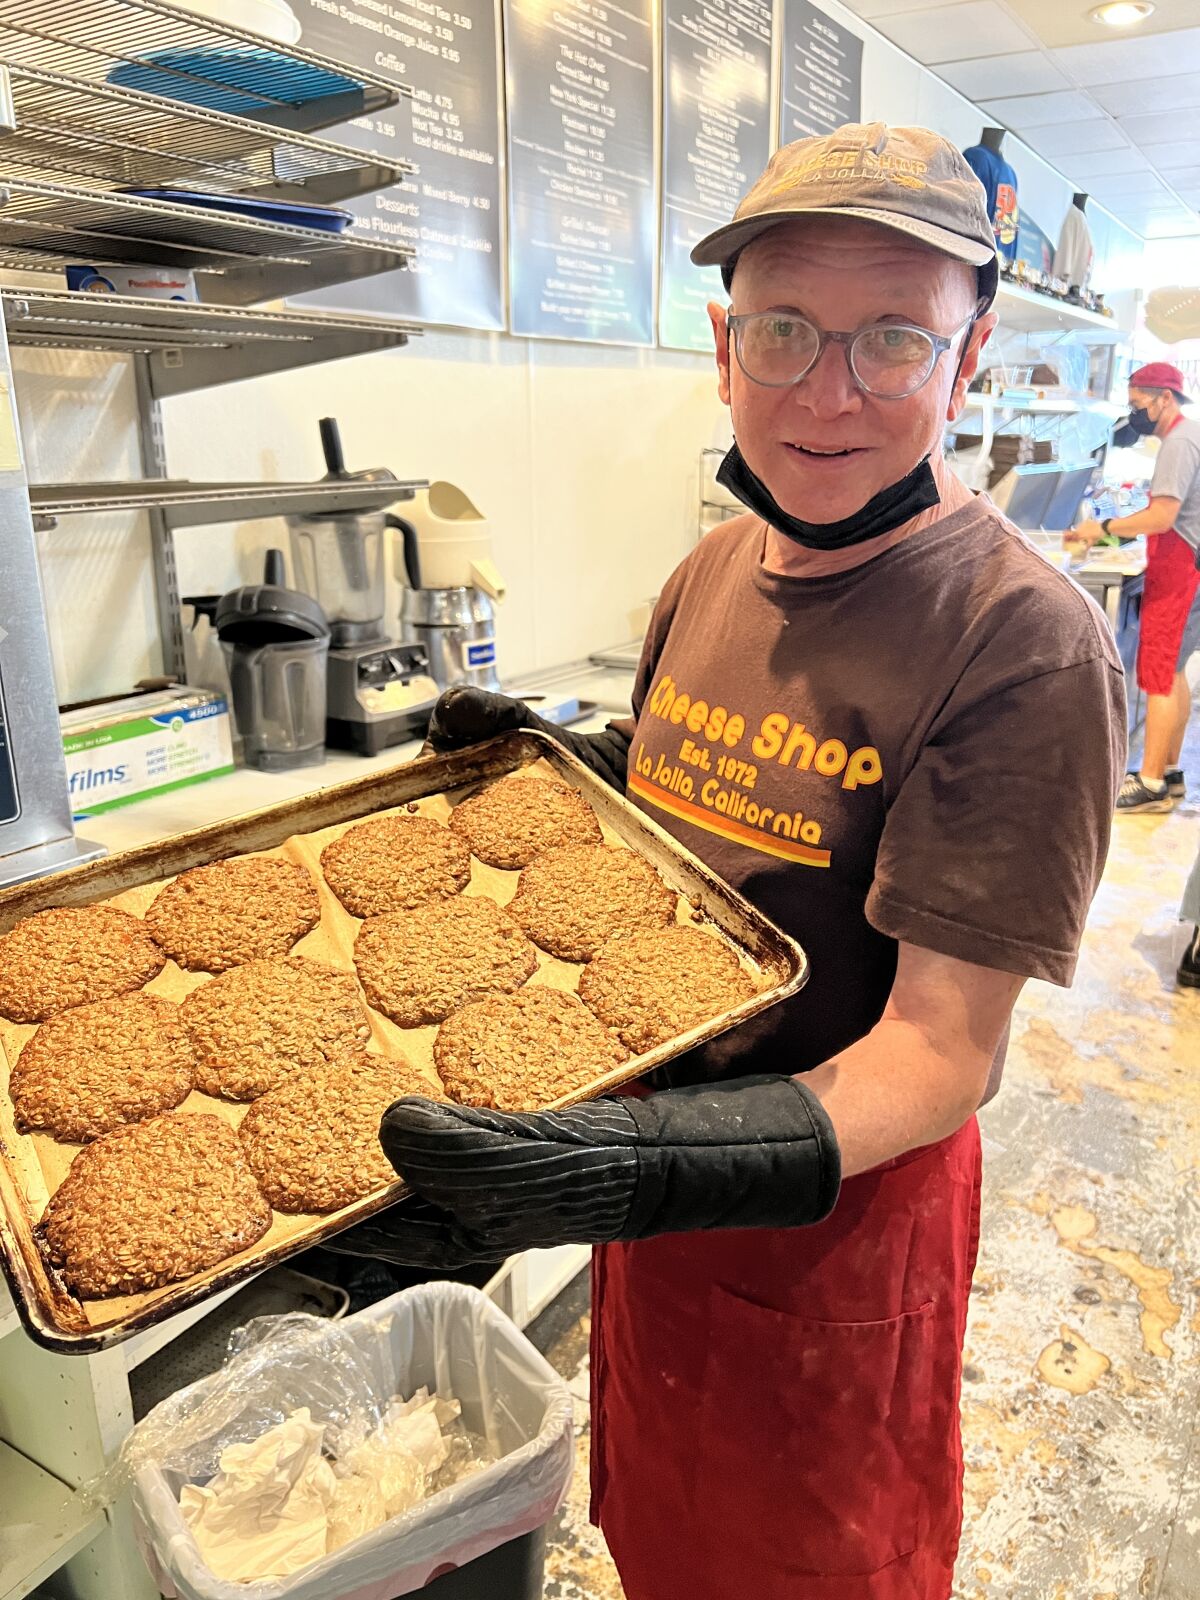 Cheese Shop co-owner Dave Schutz shows the establishment's popular oatmeal almond cookies.